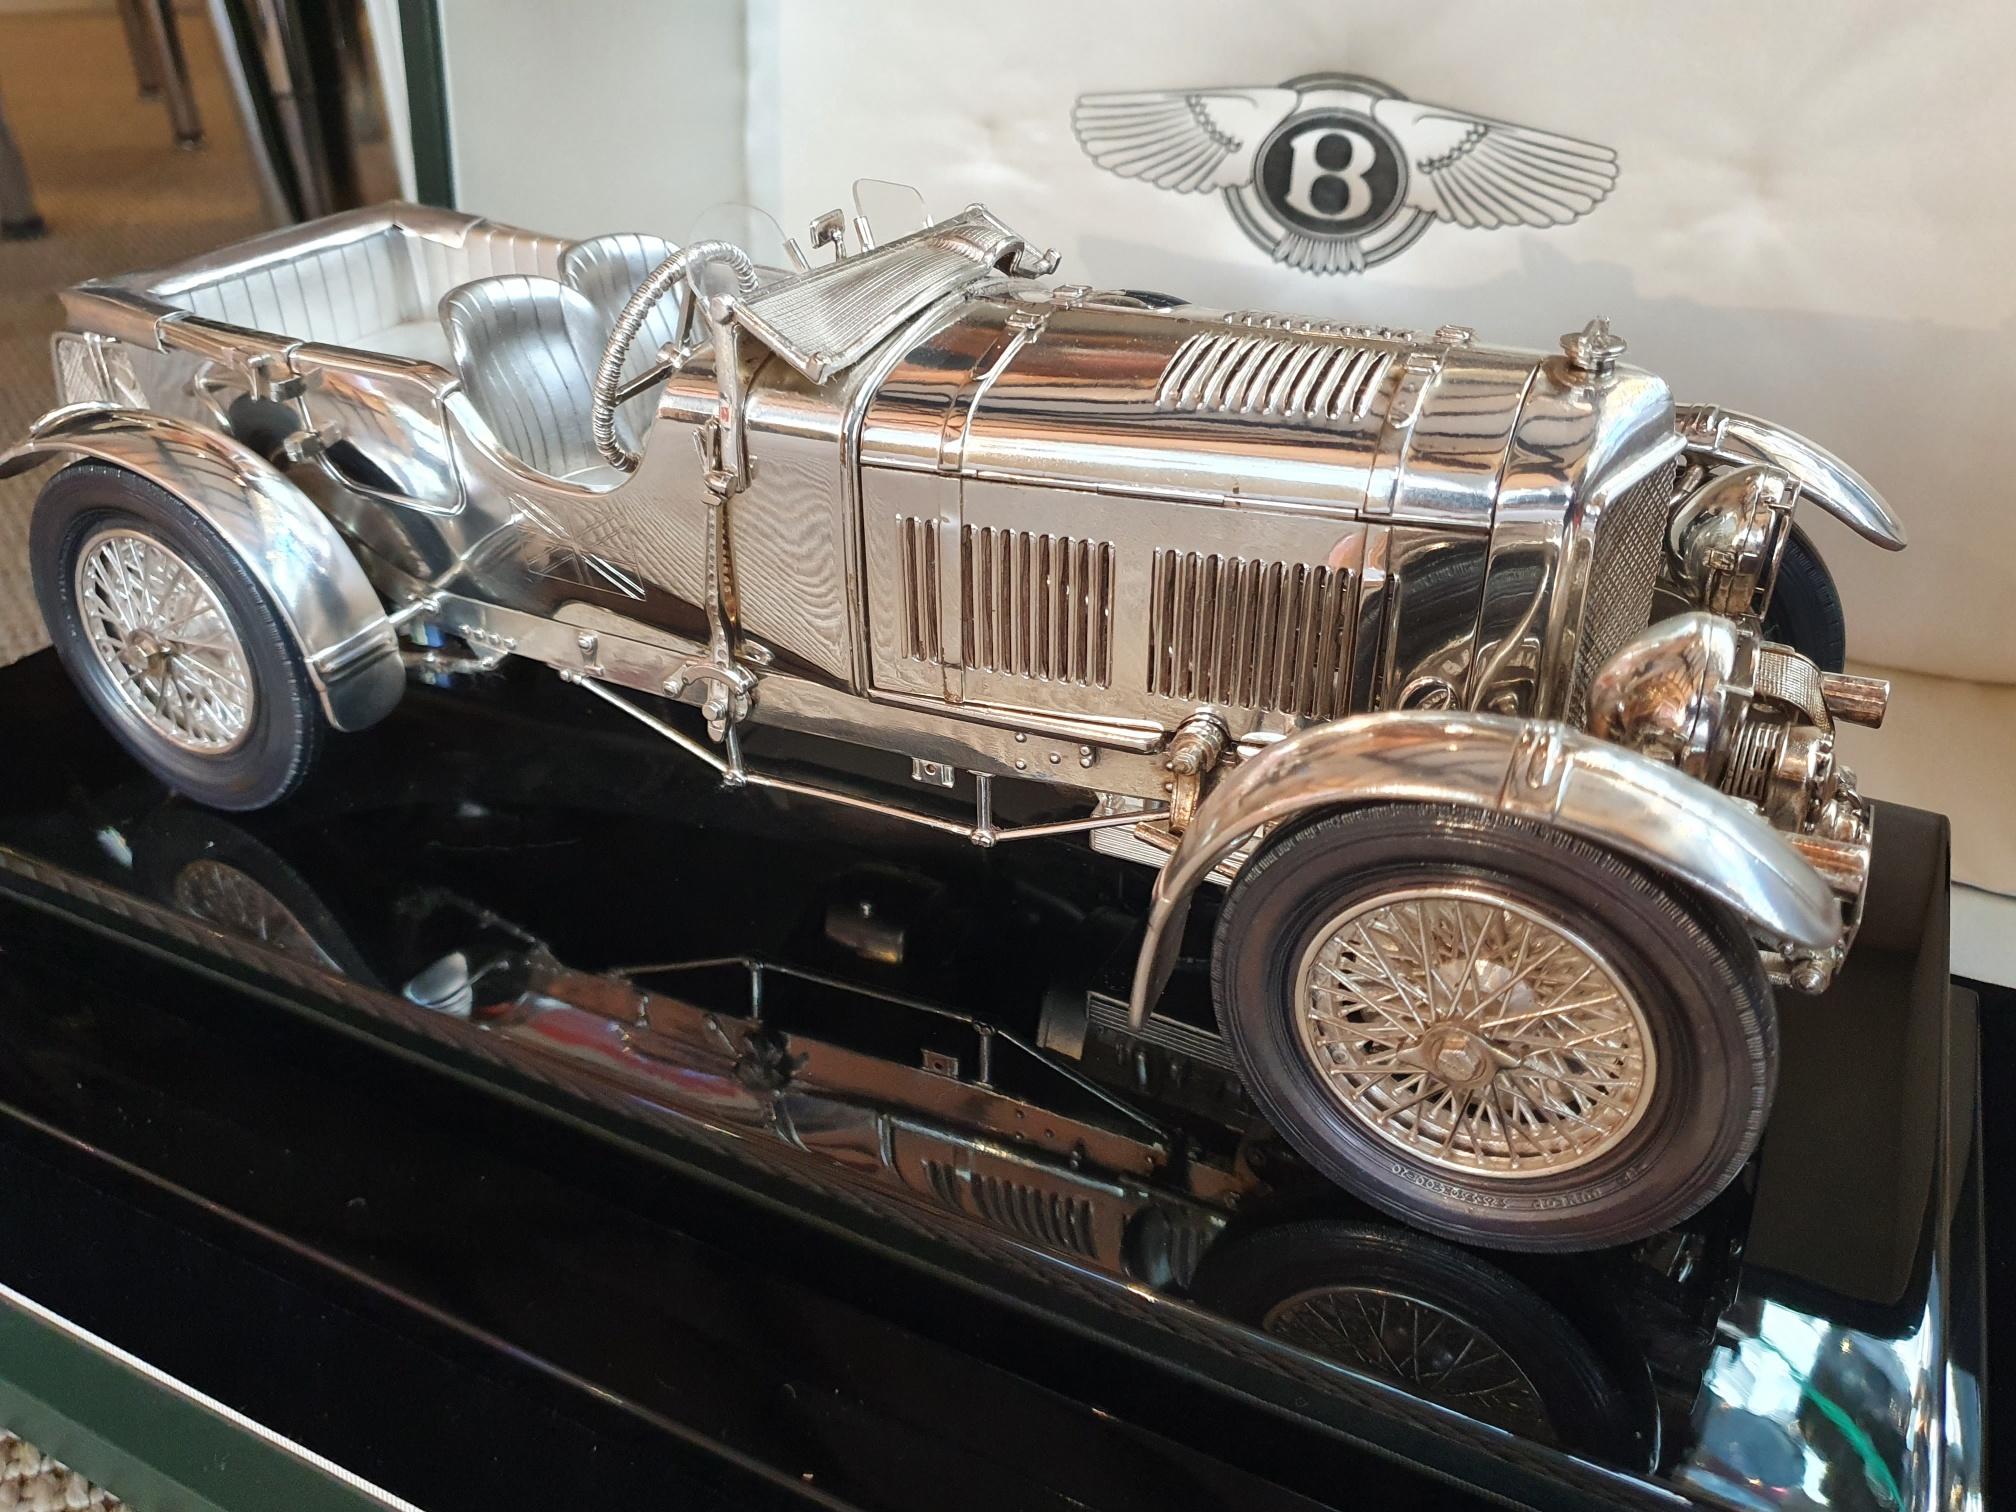 Anodized Sterling Silver Model of Tim Birkin's 1929 'Blower' Bentley, 1 of 2 made. For Sale